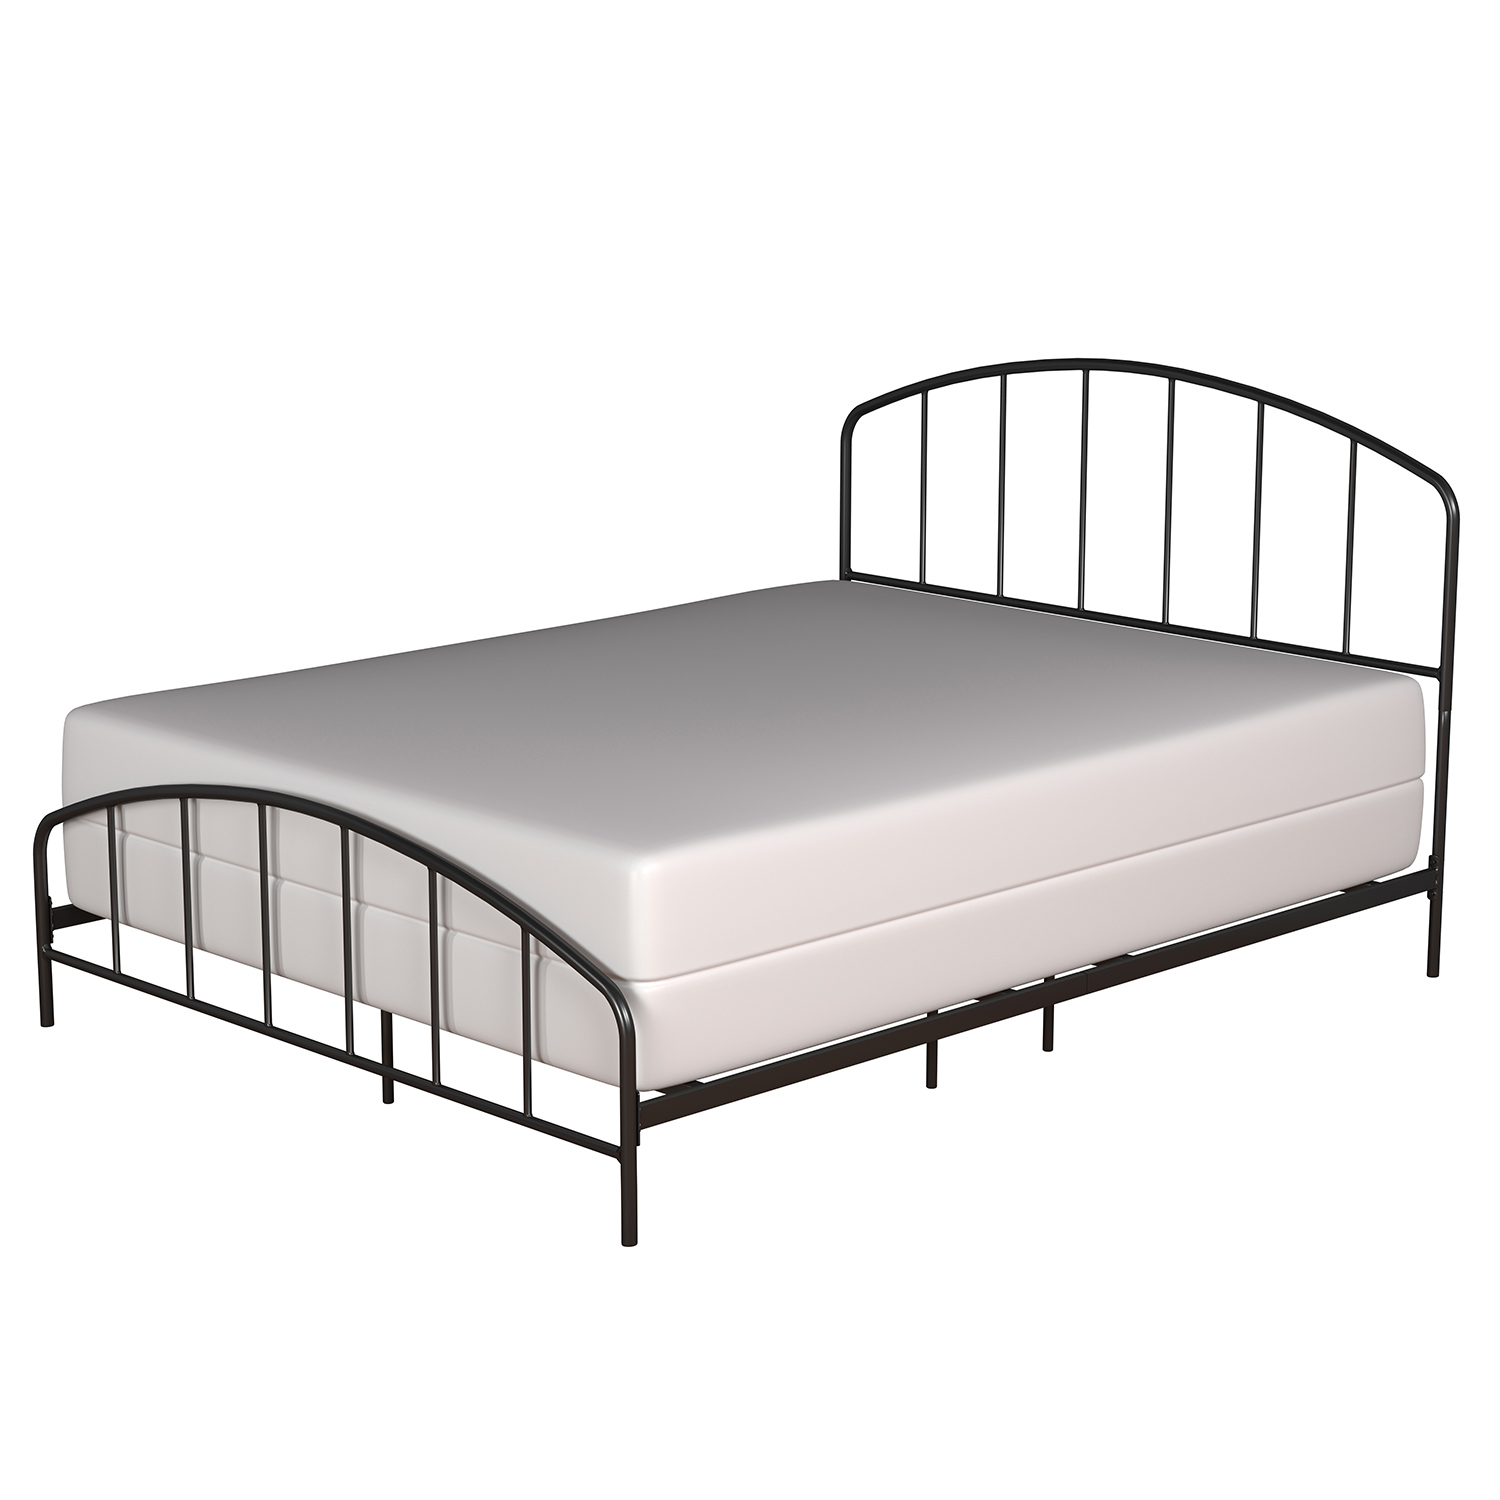 Hillsdale Tolland Metal Bed with Arched Spindle Design - Black